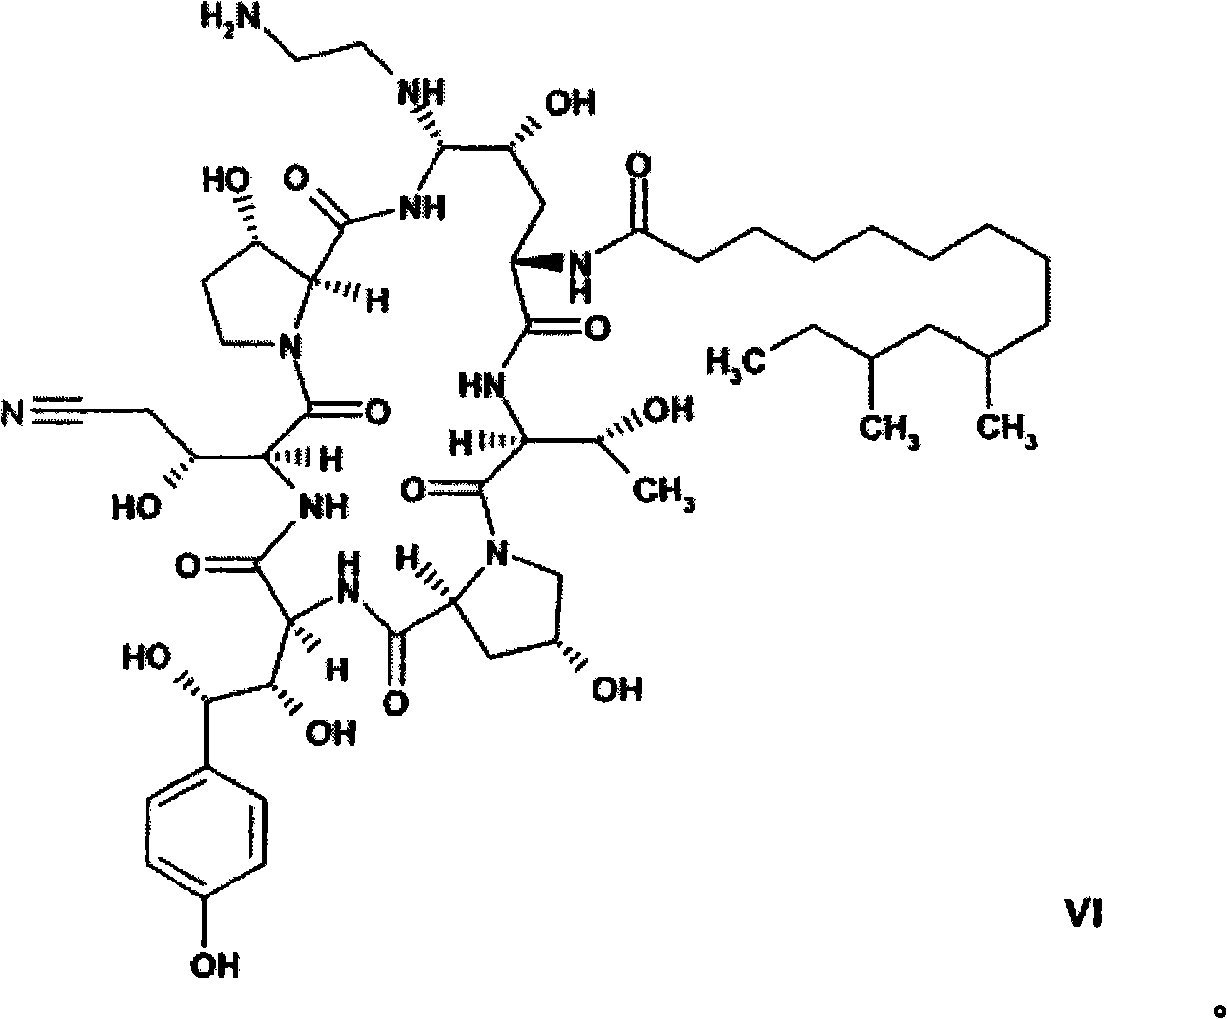 Process and intermediates for the synthesis of caspofungin